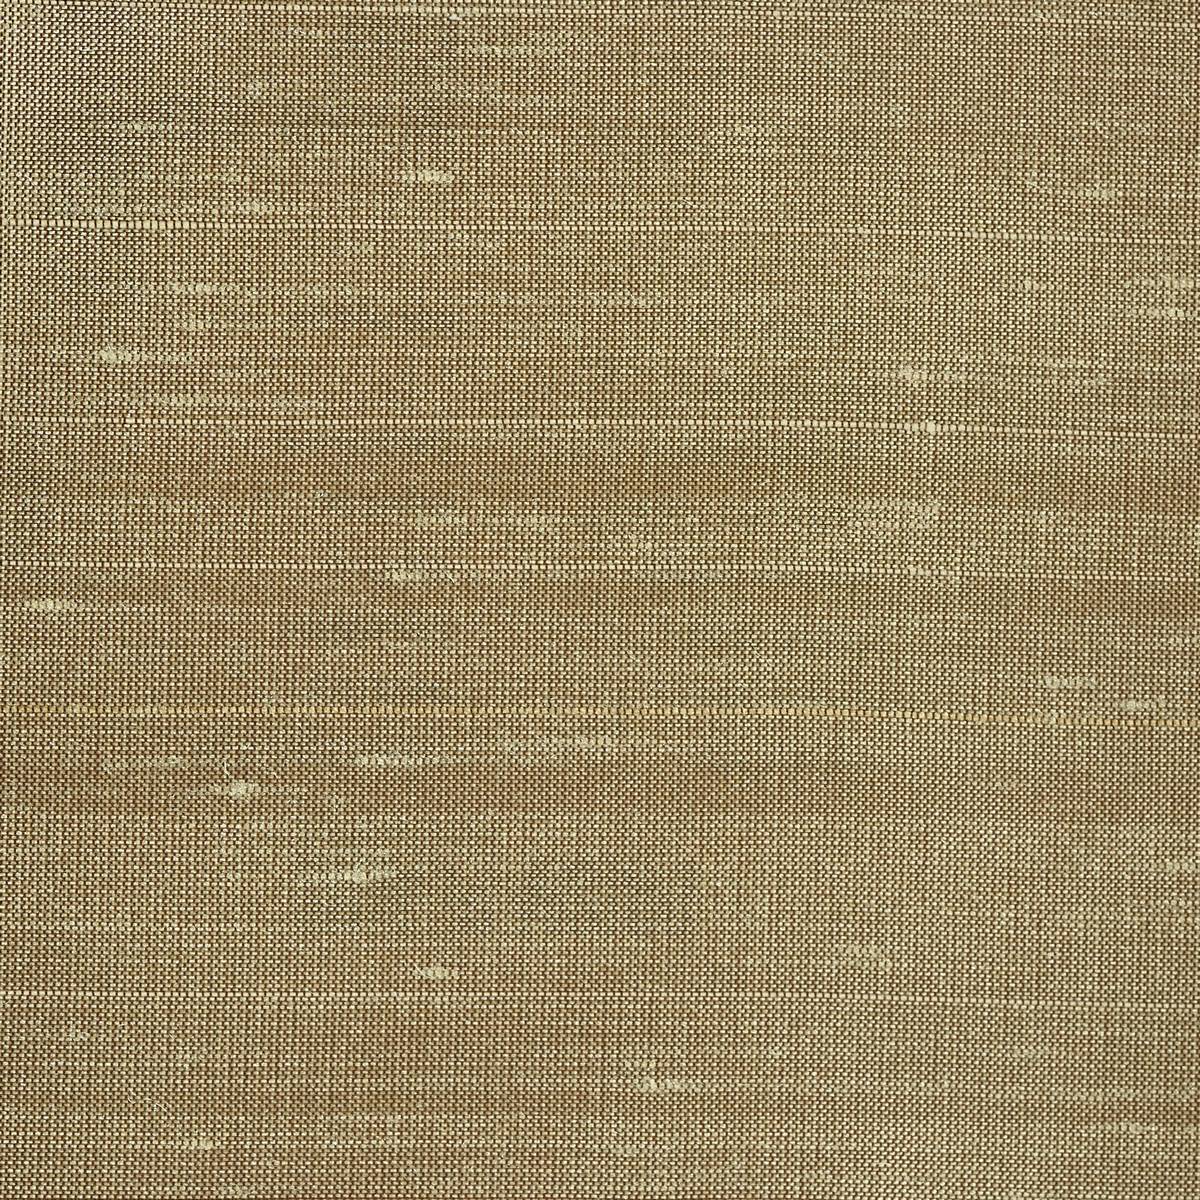 Deflect Brass Fabric by Harlequin